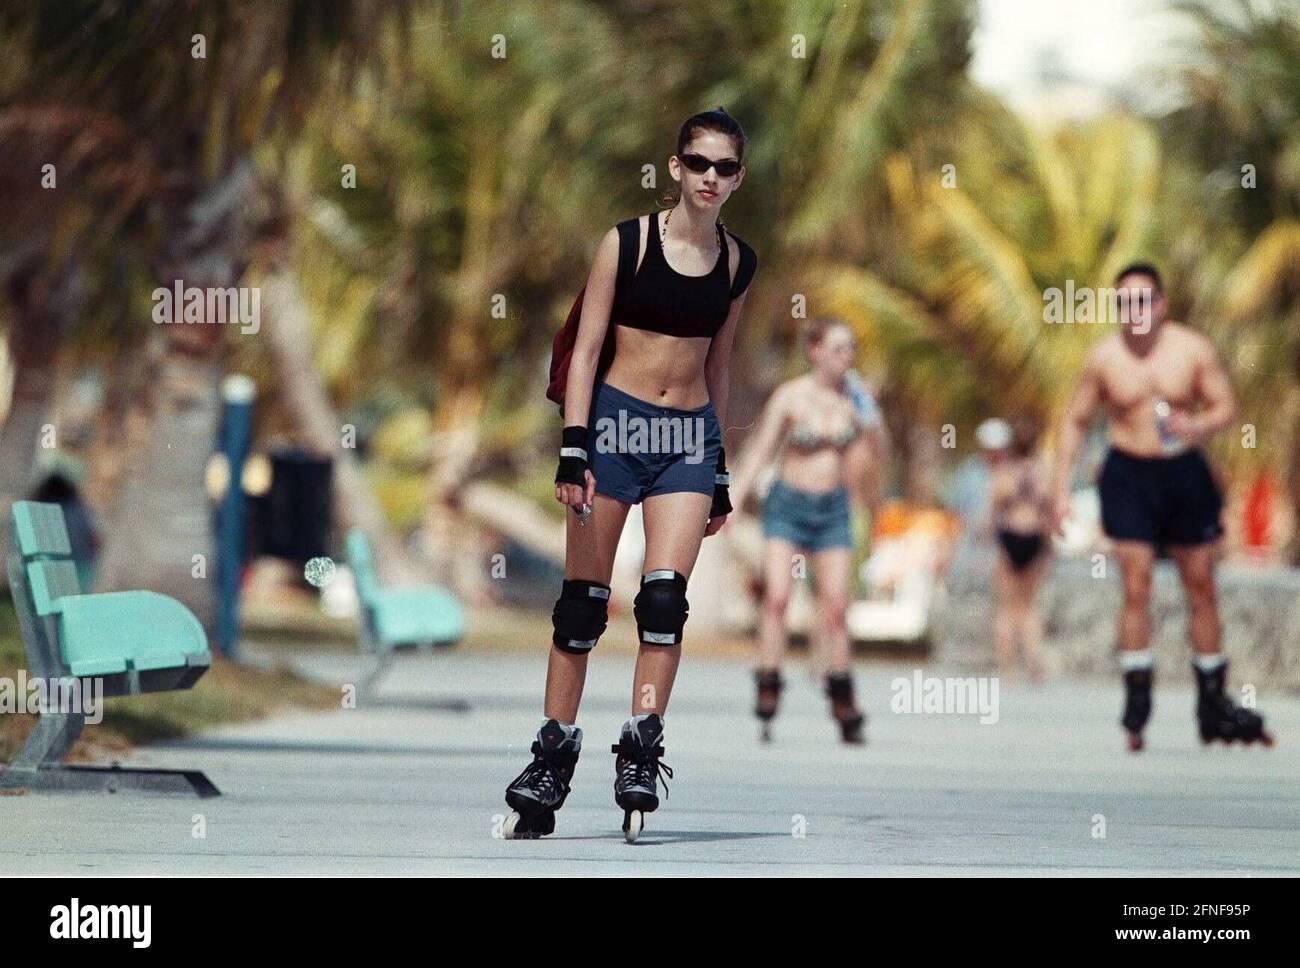 Date of recording: 14.02.1999 Roller-blader riding on the boardwalk under palm trees in Miami Beach, America. [automated translation] Stock Photo